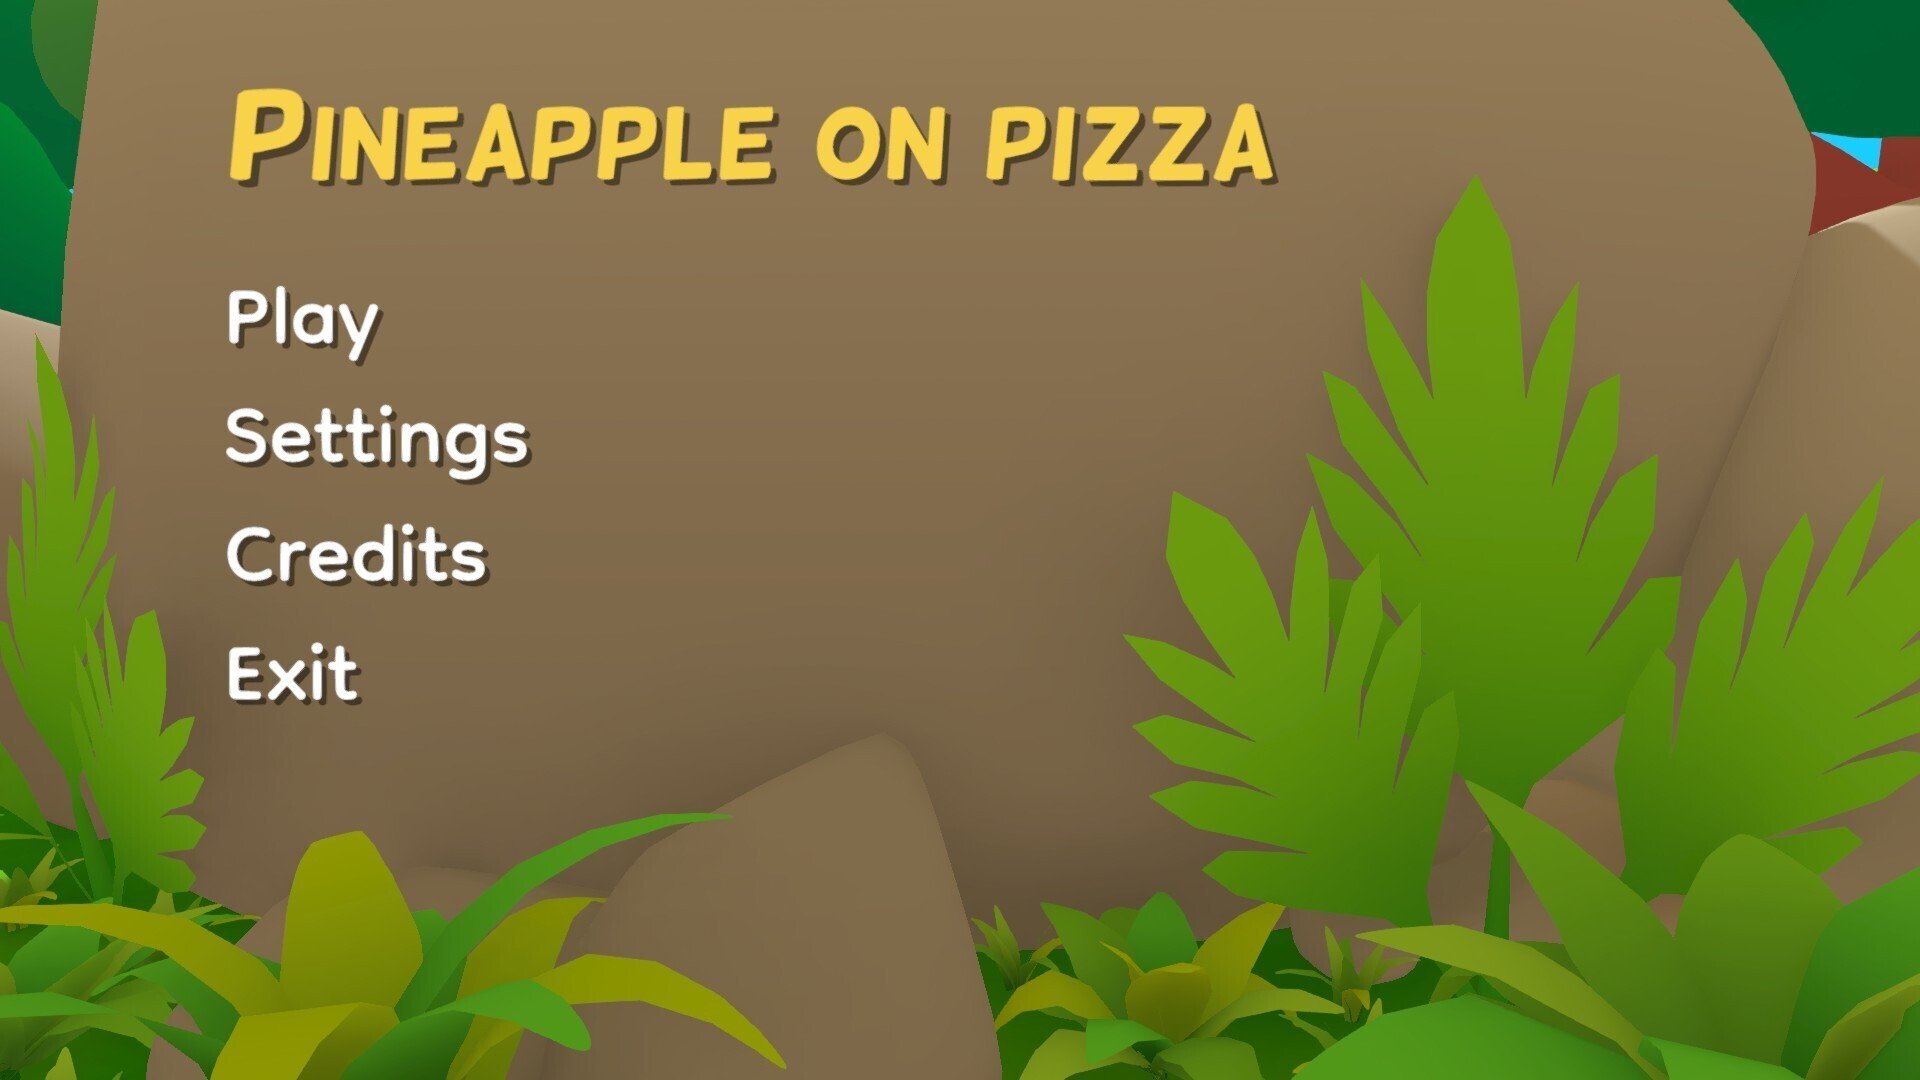 Pineapple on pizza by Majorariatto